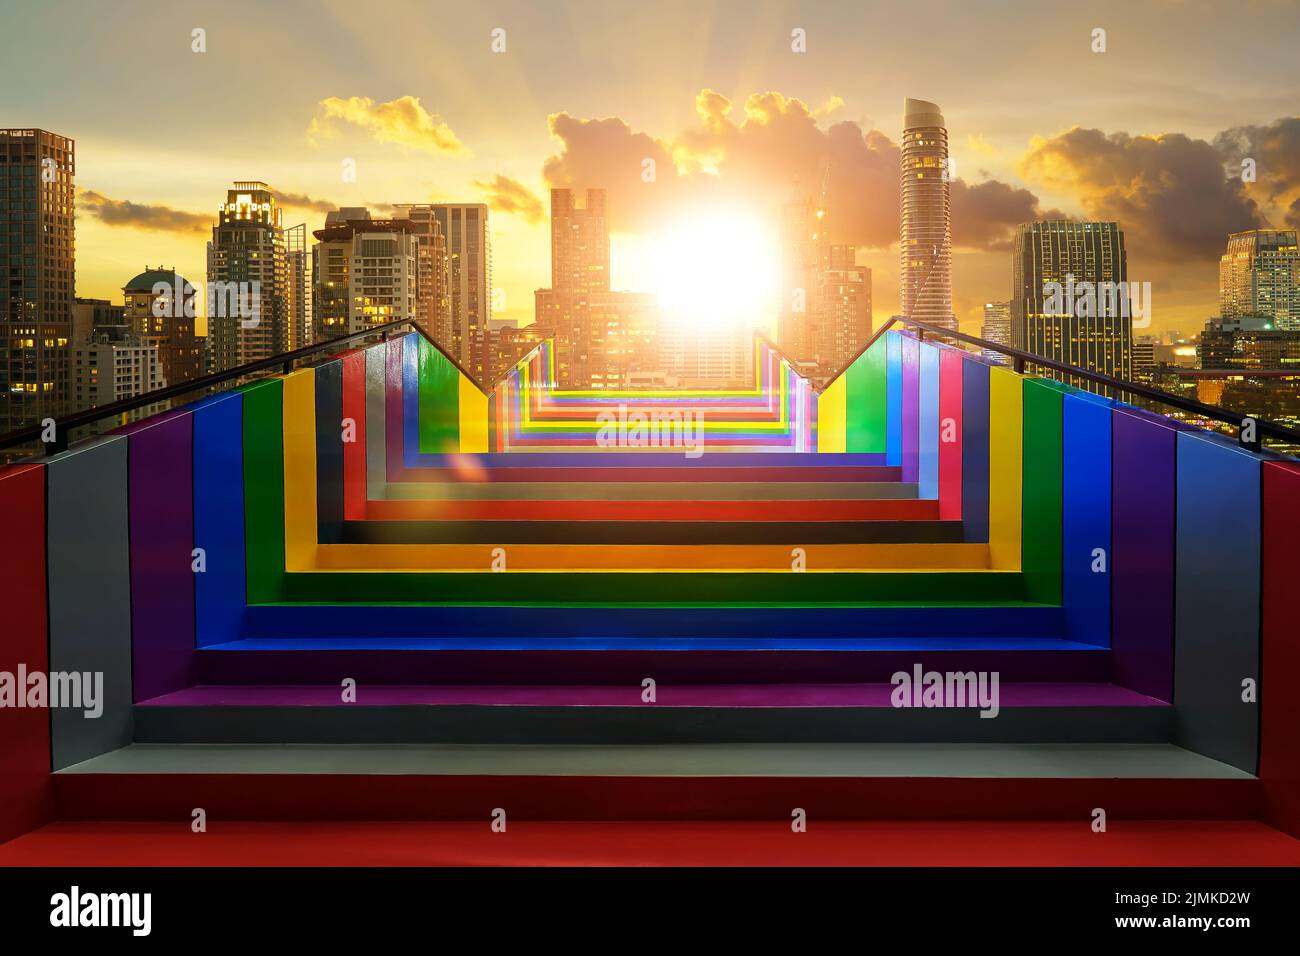 Colorful stair to modern city Stock Photo